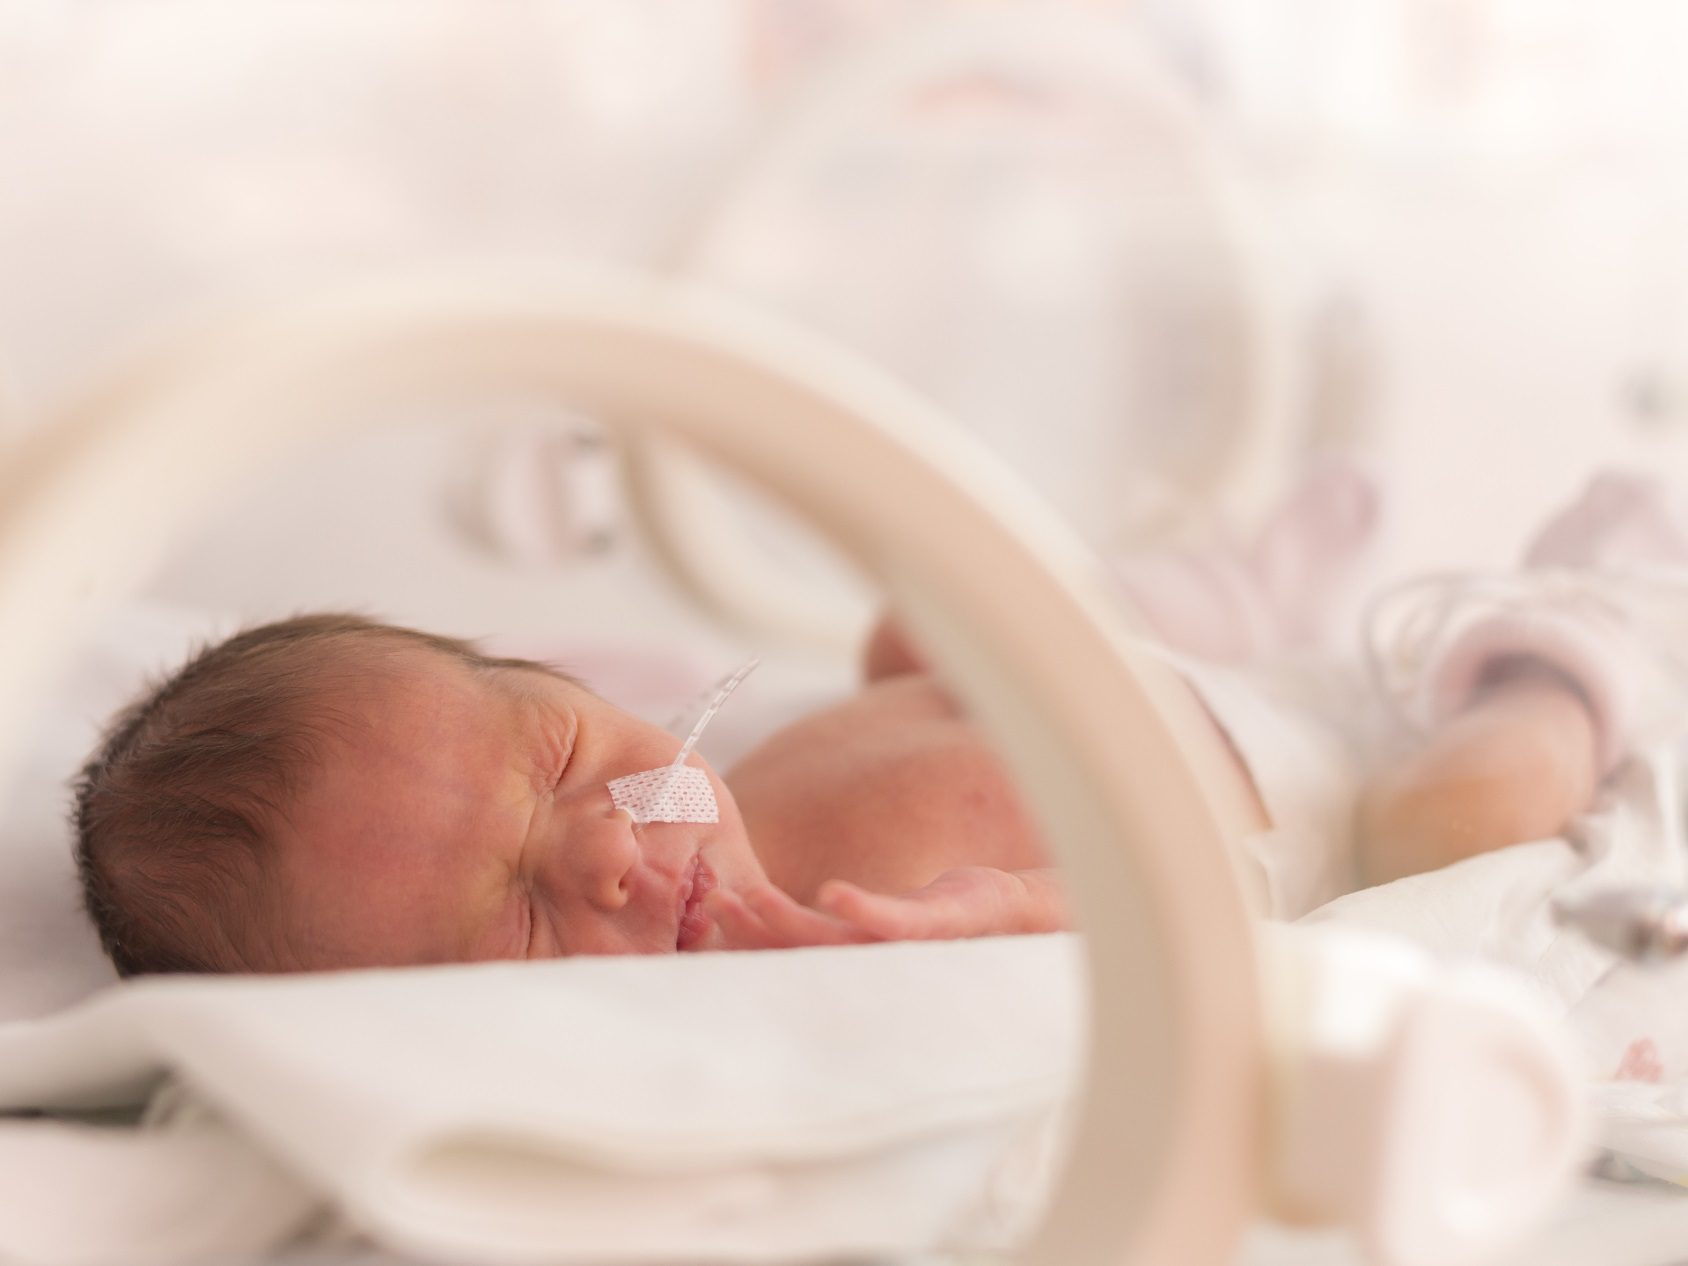 Working with maternity units to reduce instances of cerebral palsy